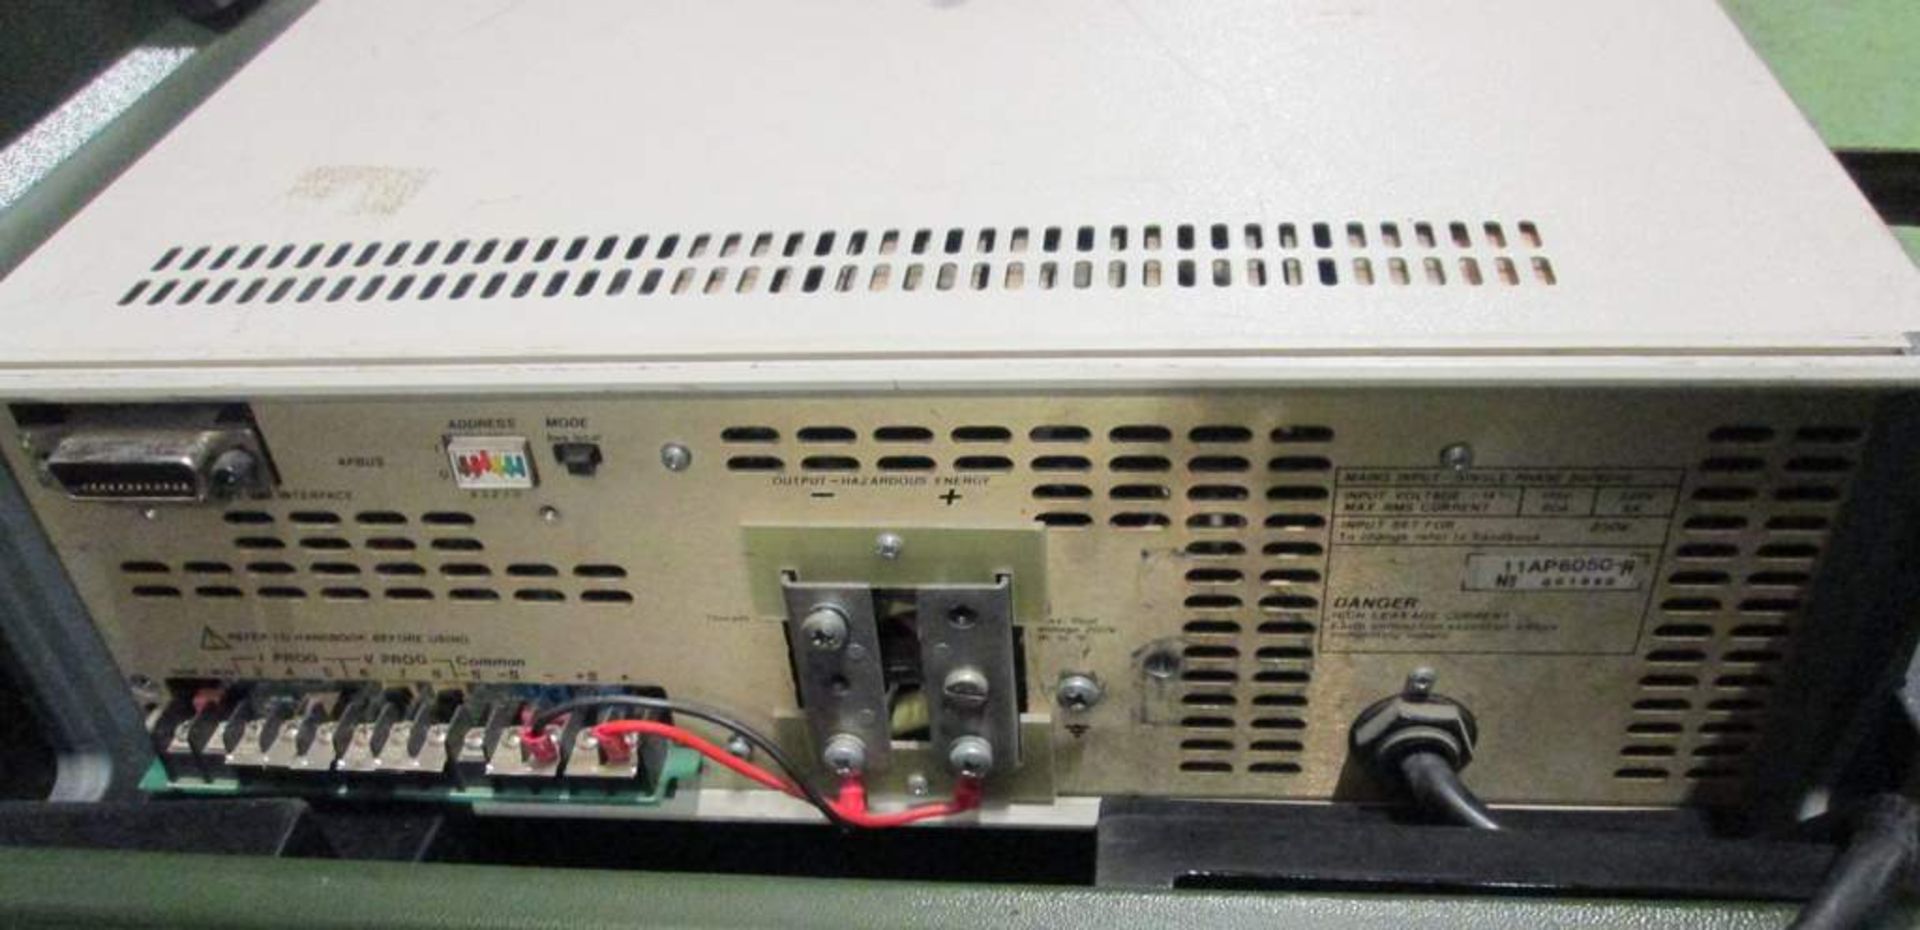 Farnell AP60-50 Power Supply - Image 2 of 3